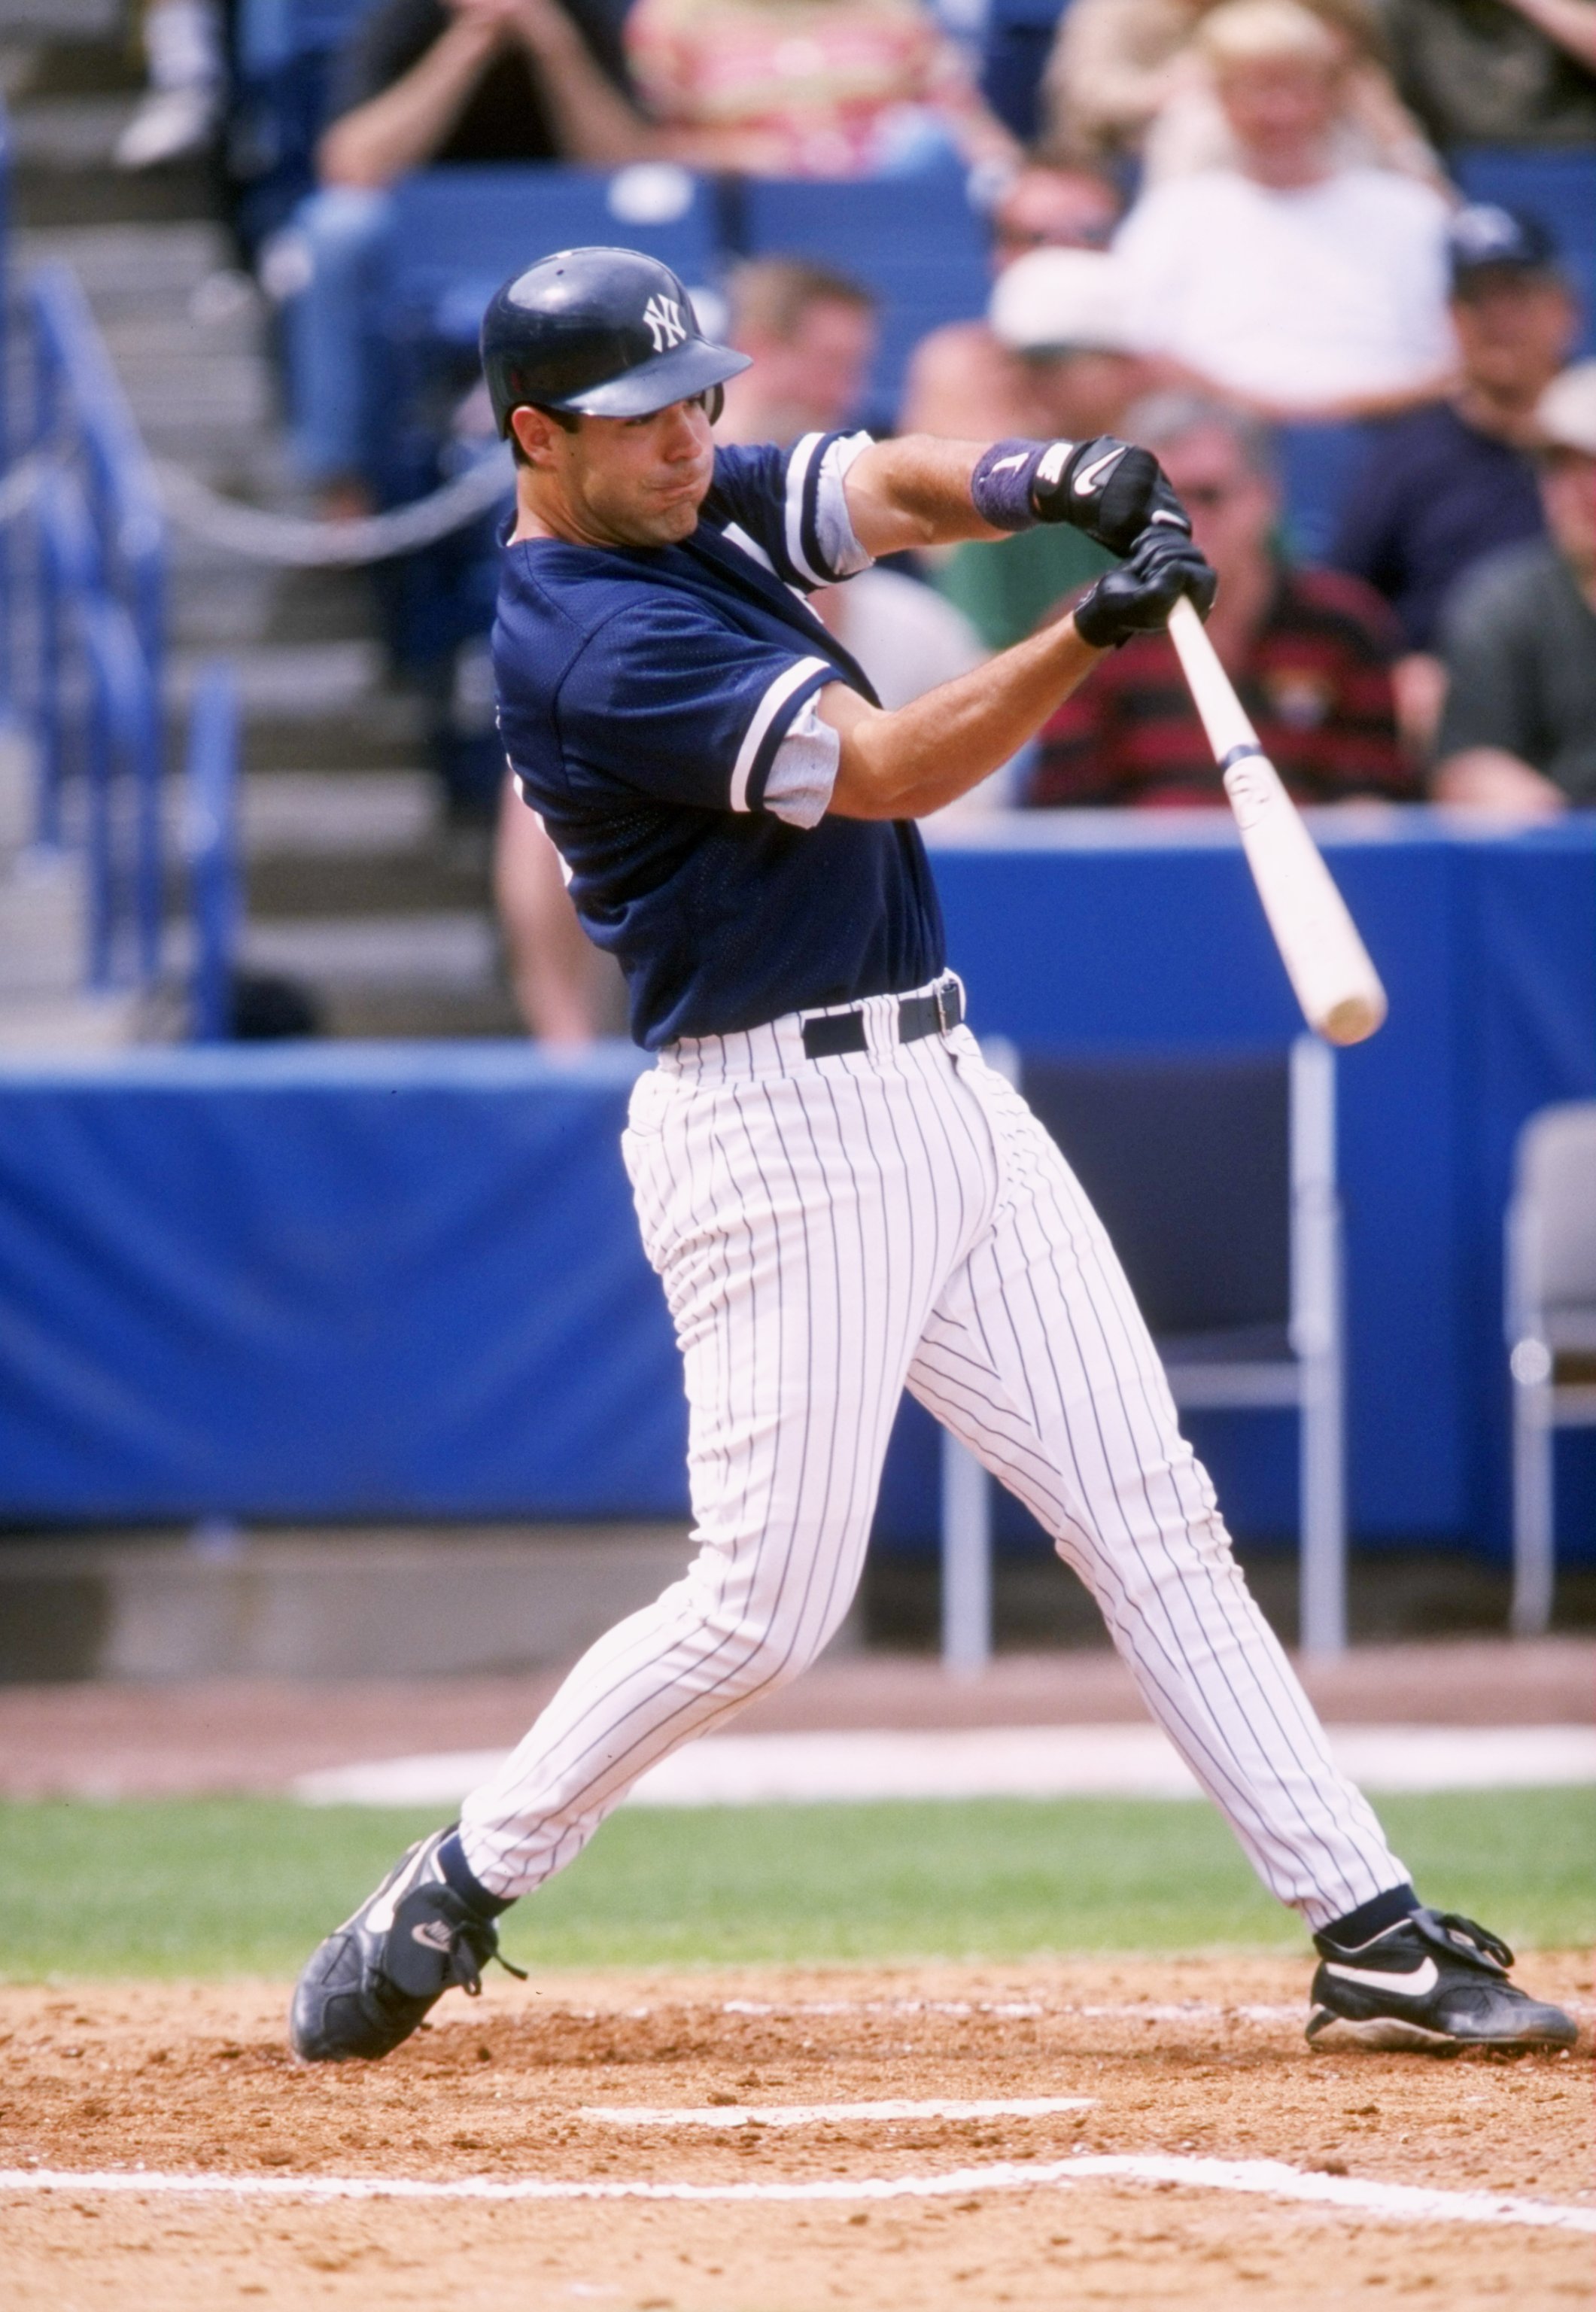 Mike Lowell « The Future Blog of the Red Sox in 2023